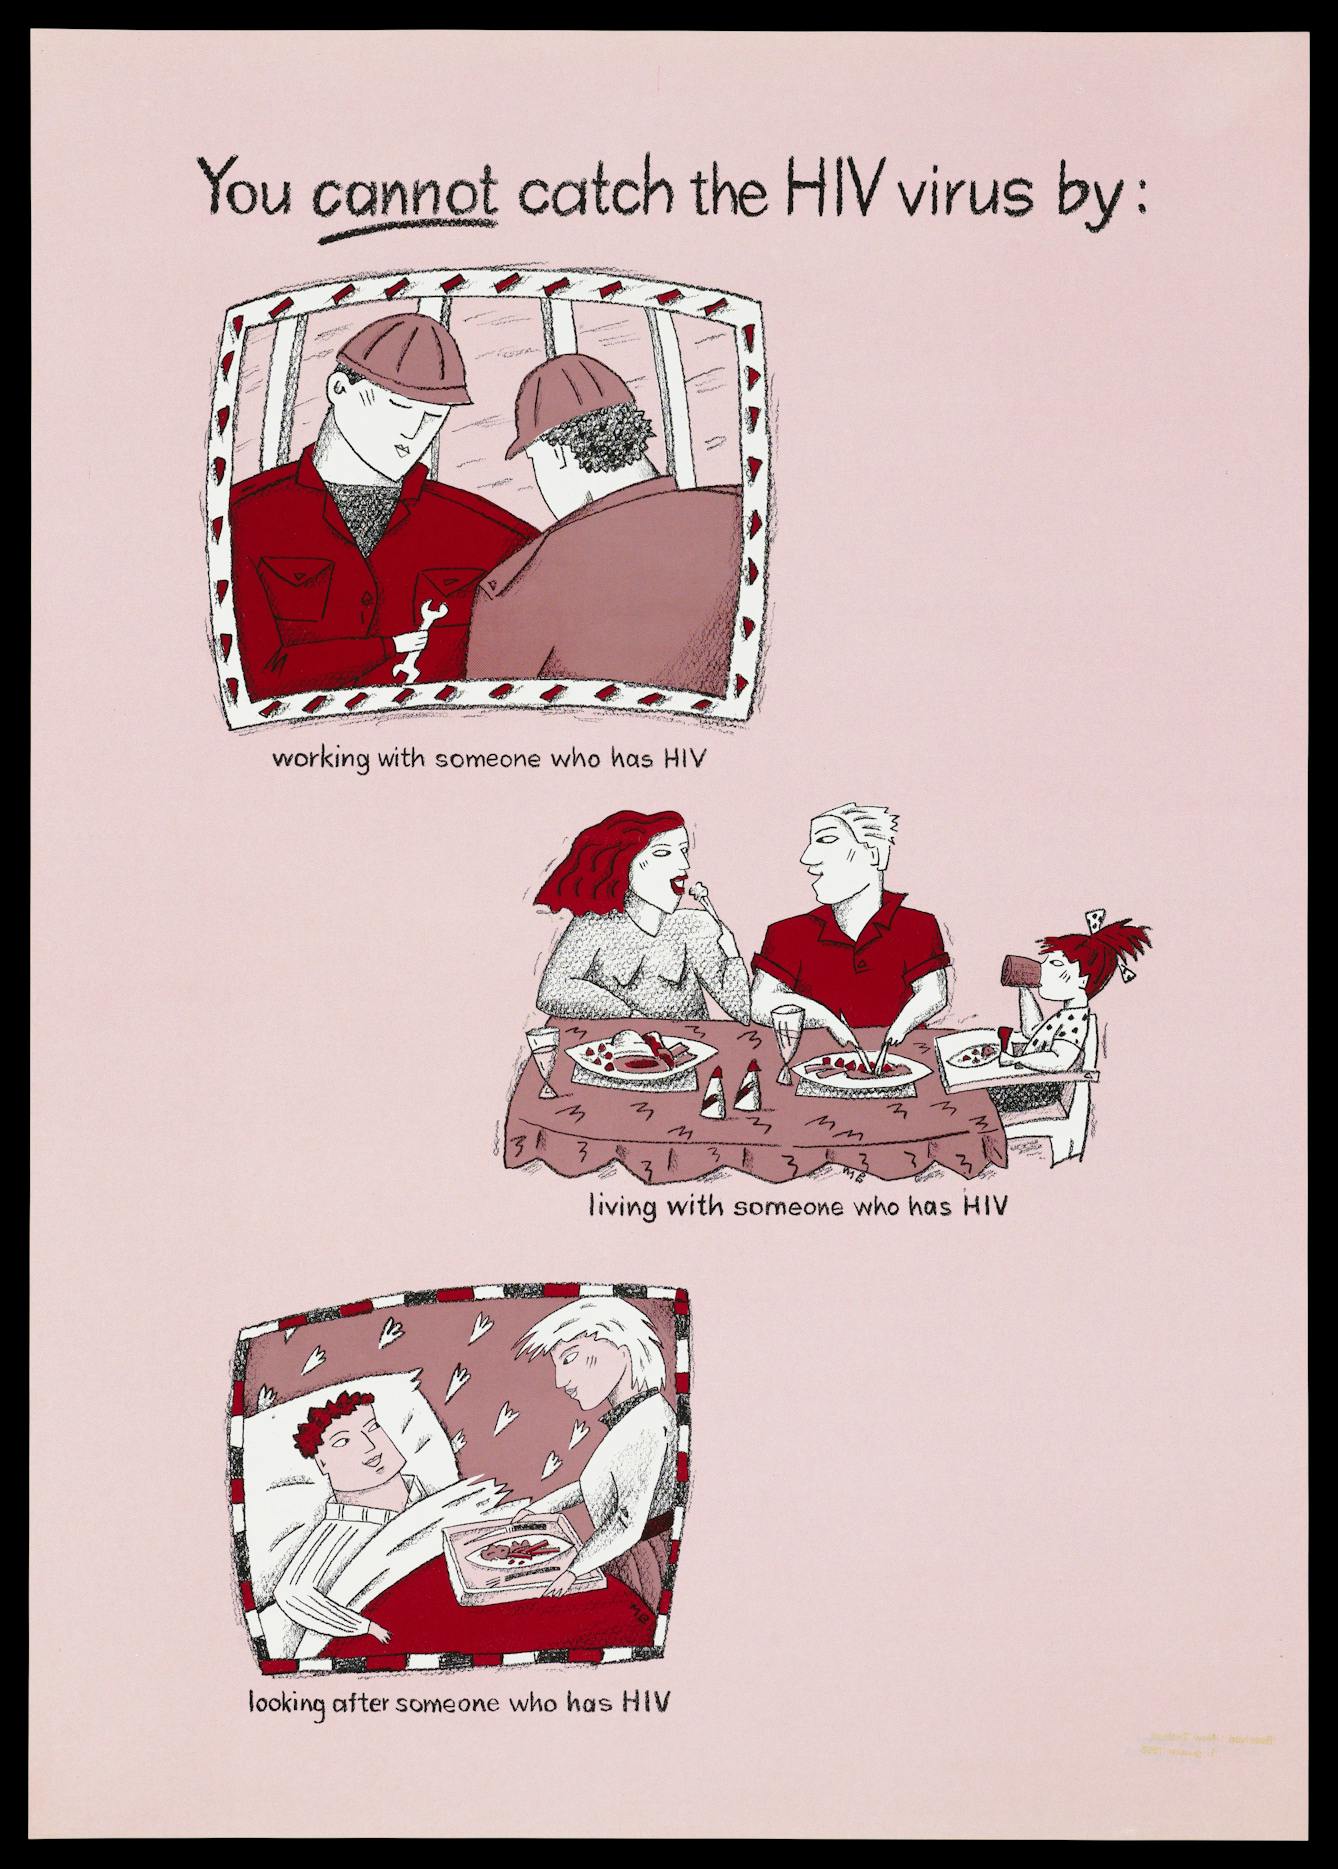 Lithograph, printed in burgundy, pink and black on white, stating: "You cannot catch the HIV virus by: working with someone who has HIV; living with someone who has HIV; looking after someone who has HIV." New Zealand, published in or before 1995.